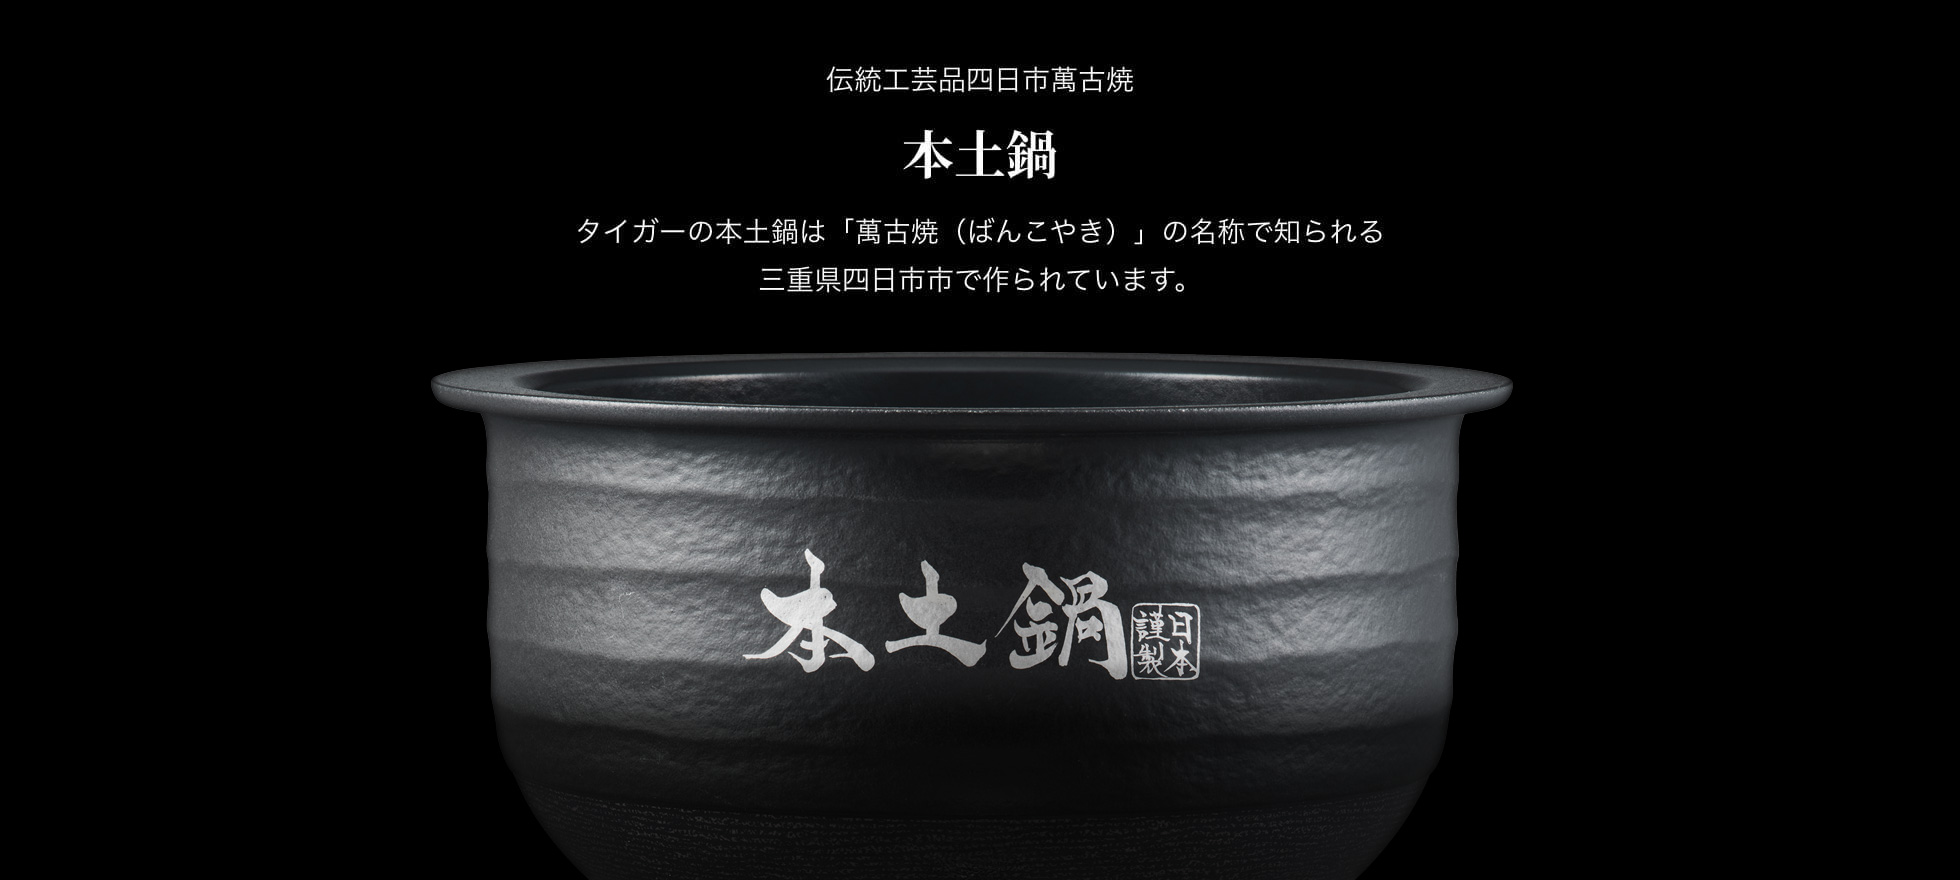 Yokkaichi Banko ware, a traditional craft. Authentic ceramic inner pot. Tiger's authentic donabe is made in Yokkaichi City, Mie Prefecture known as the home of Banko ware.